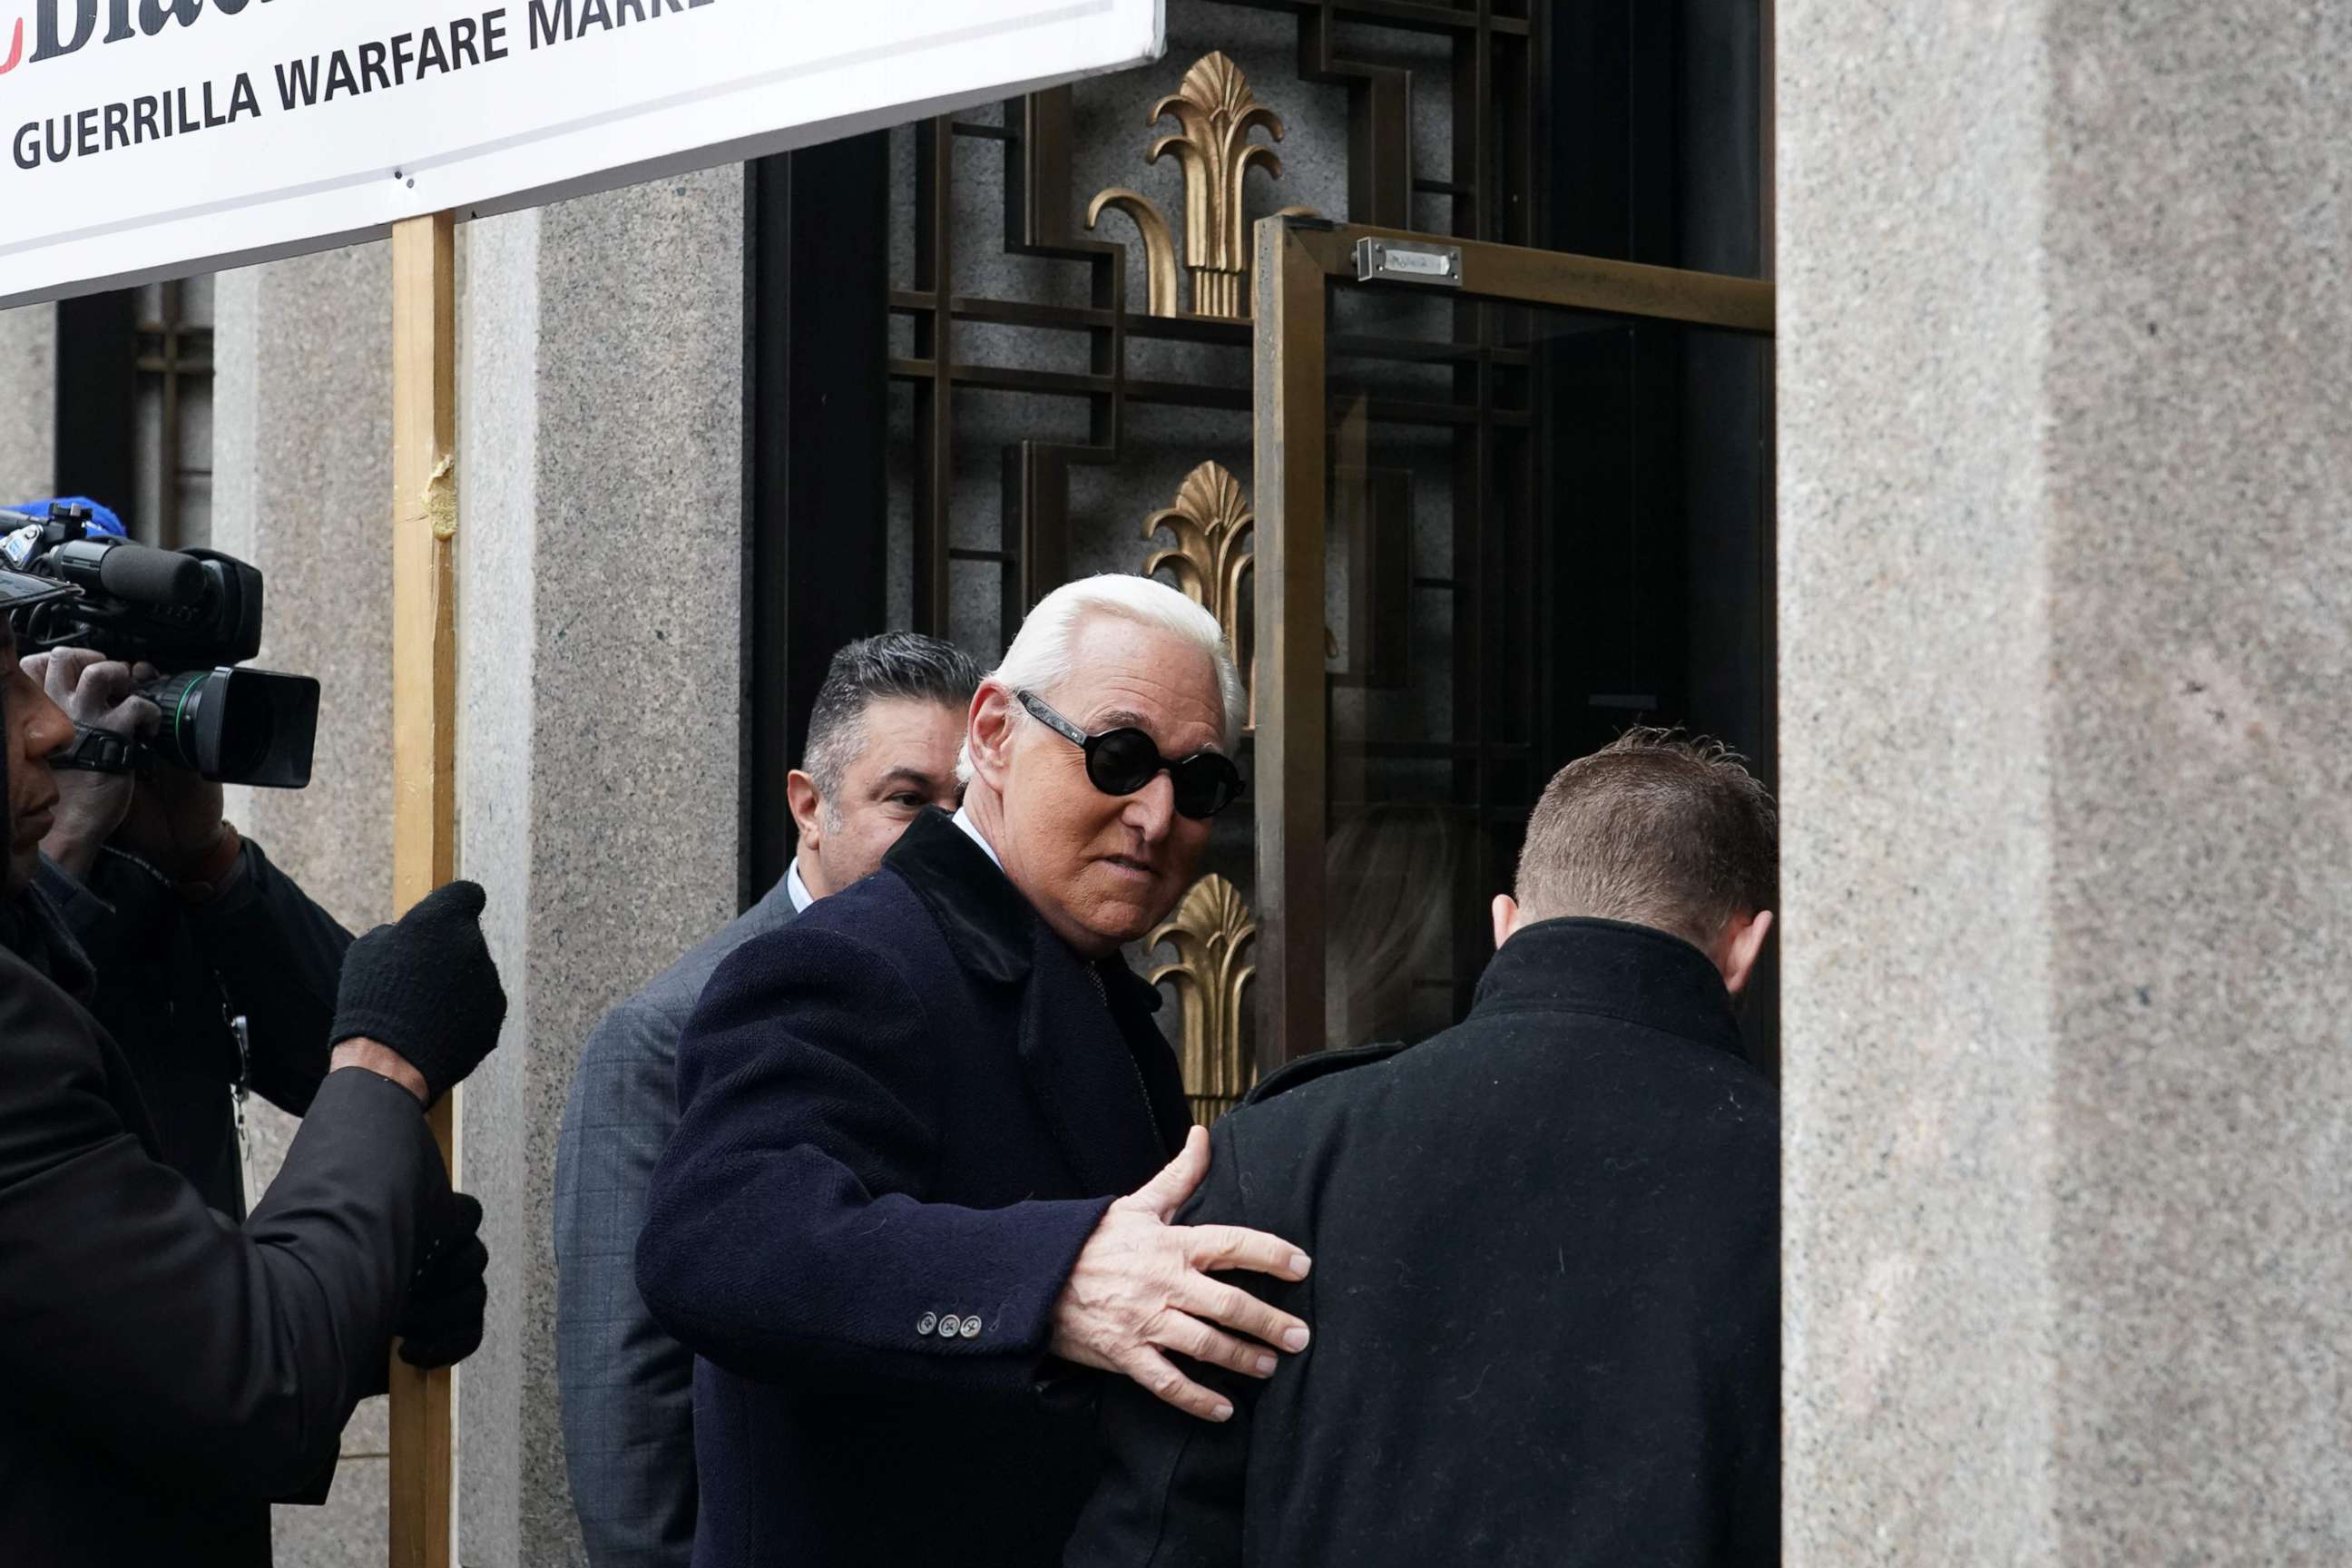 PHOTO: Roger Stone arrives at court prior to his sentencing hearing, Feb. 20, 2020, in Washington, D.C.